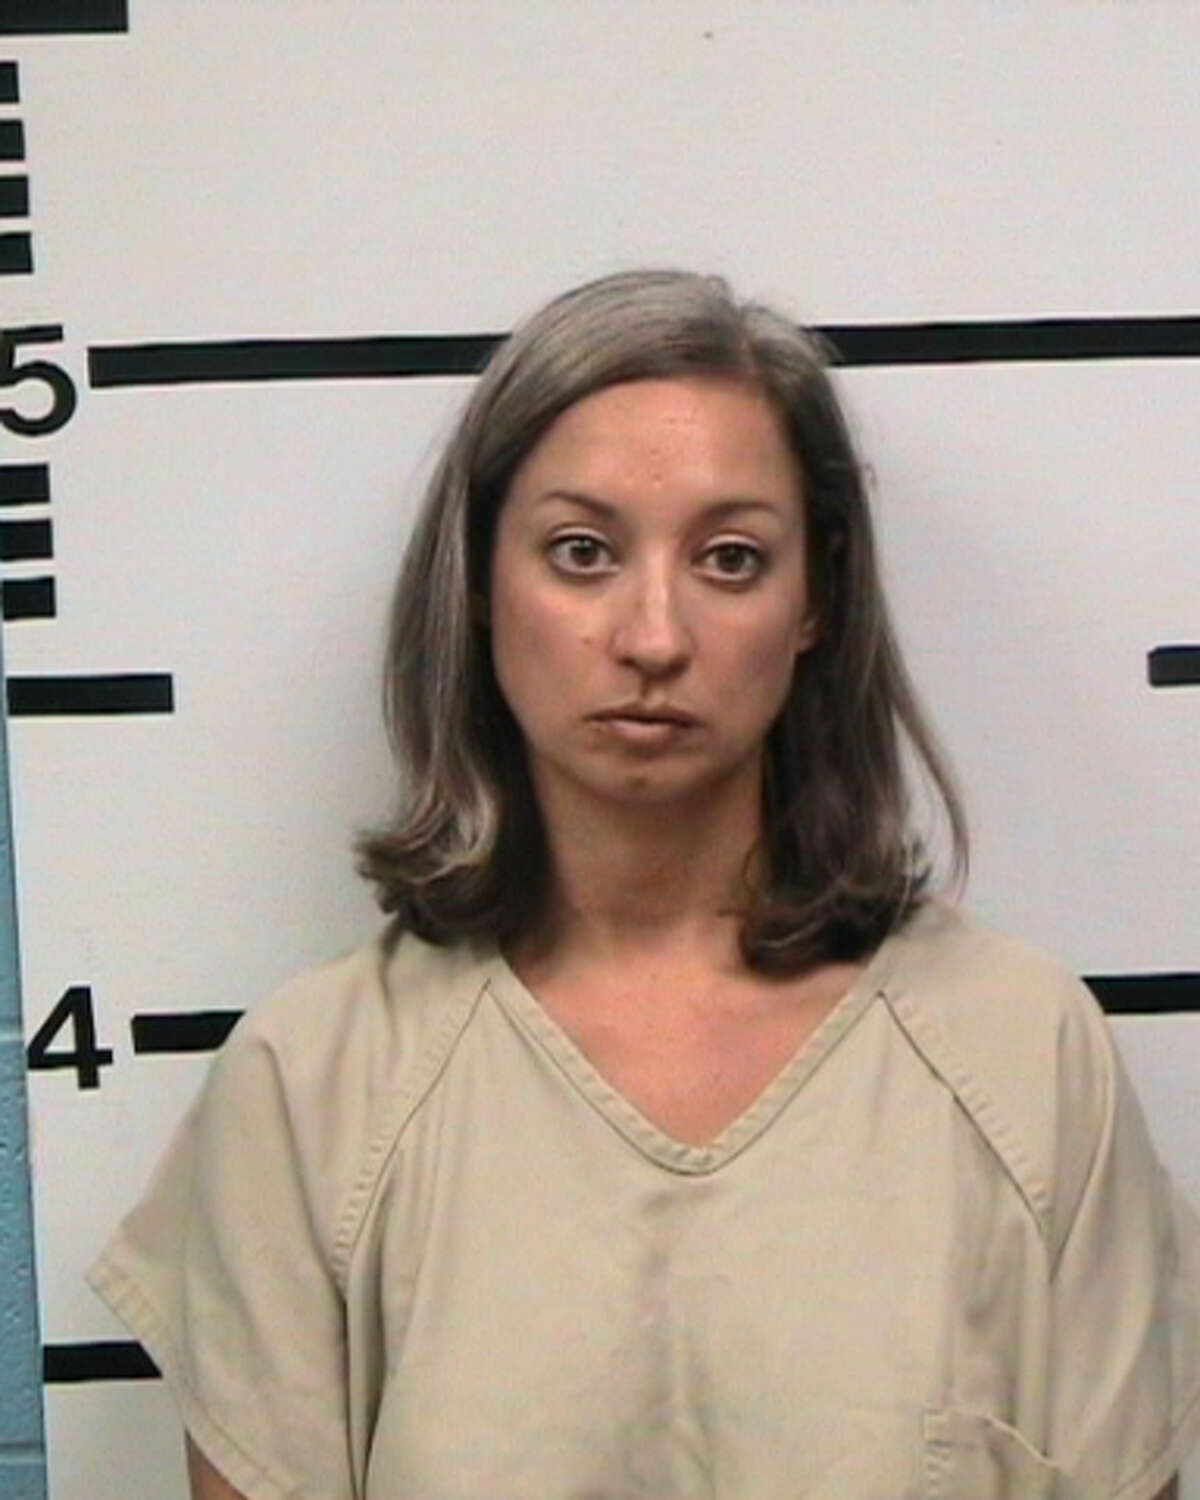 Sara Kathryn D'Spain of Bandera, Texas, now faces one charge of improper relationship between an educator and student. She was booked into the Kerr County Jail on a $35,000 bond and has since bailed out.